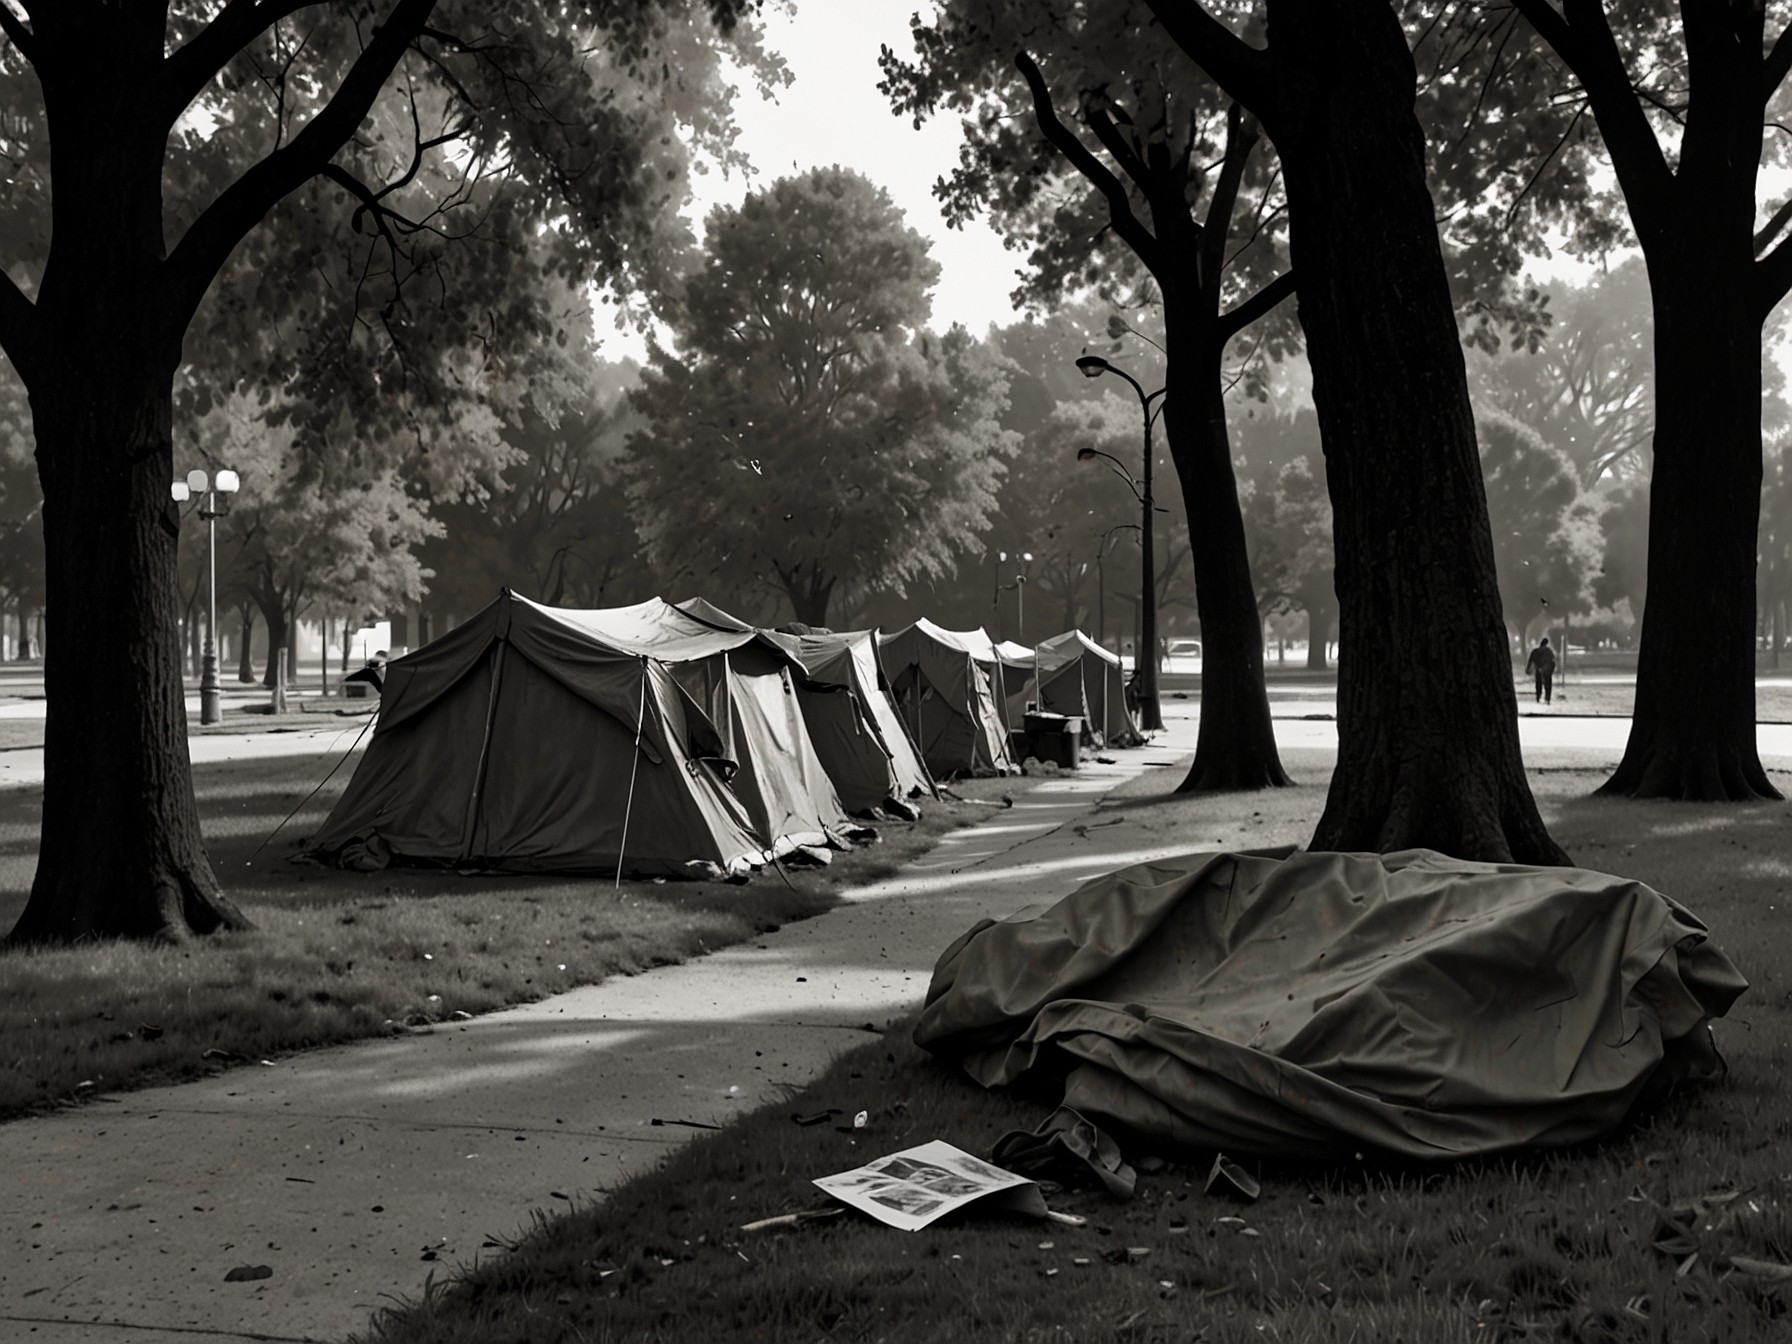 An illustration depicting a homeless encampment in a public park, highlighting the visible impact of homelessness in urban areas and the challenges faced by local governments.